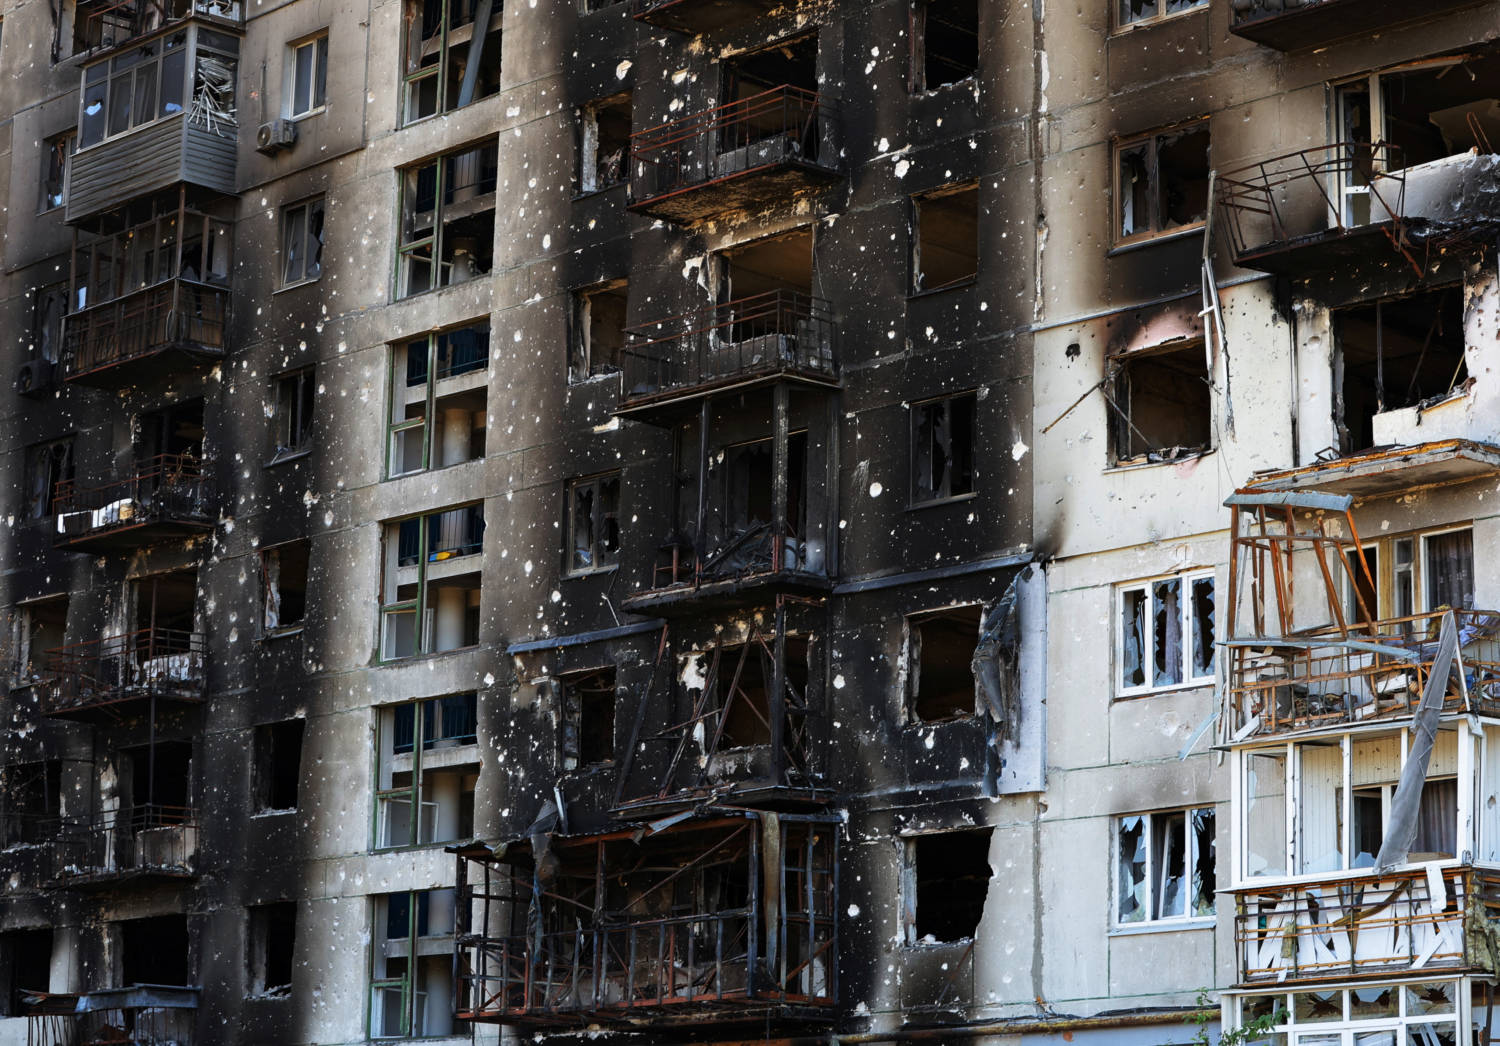 A View Shows A Heavily Damaged Apartment Building In Sievierodonetsk